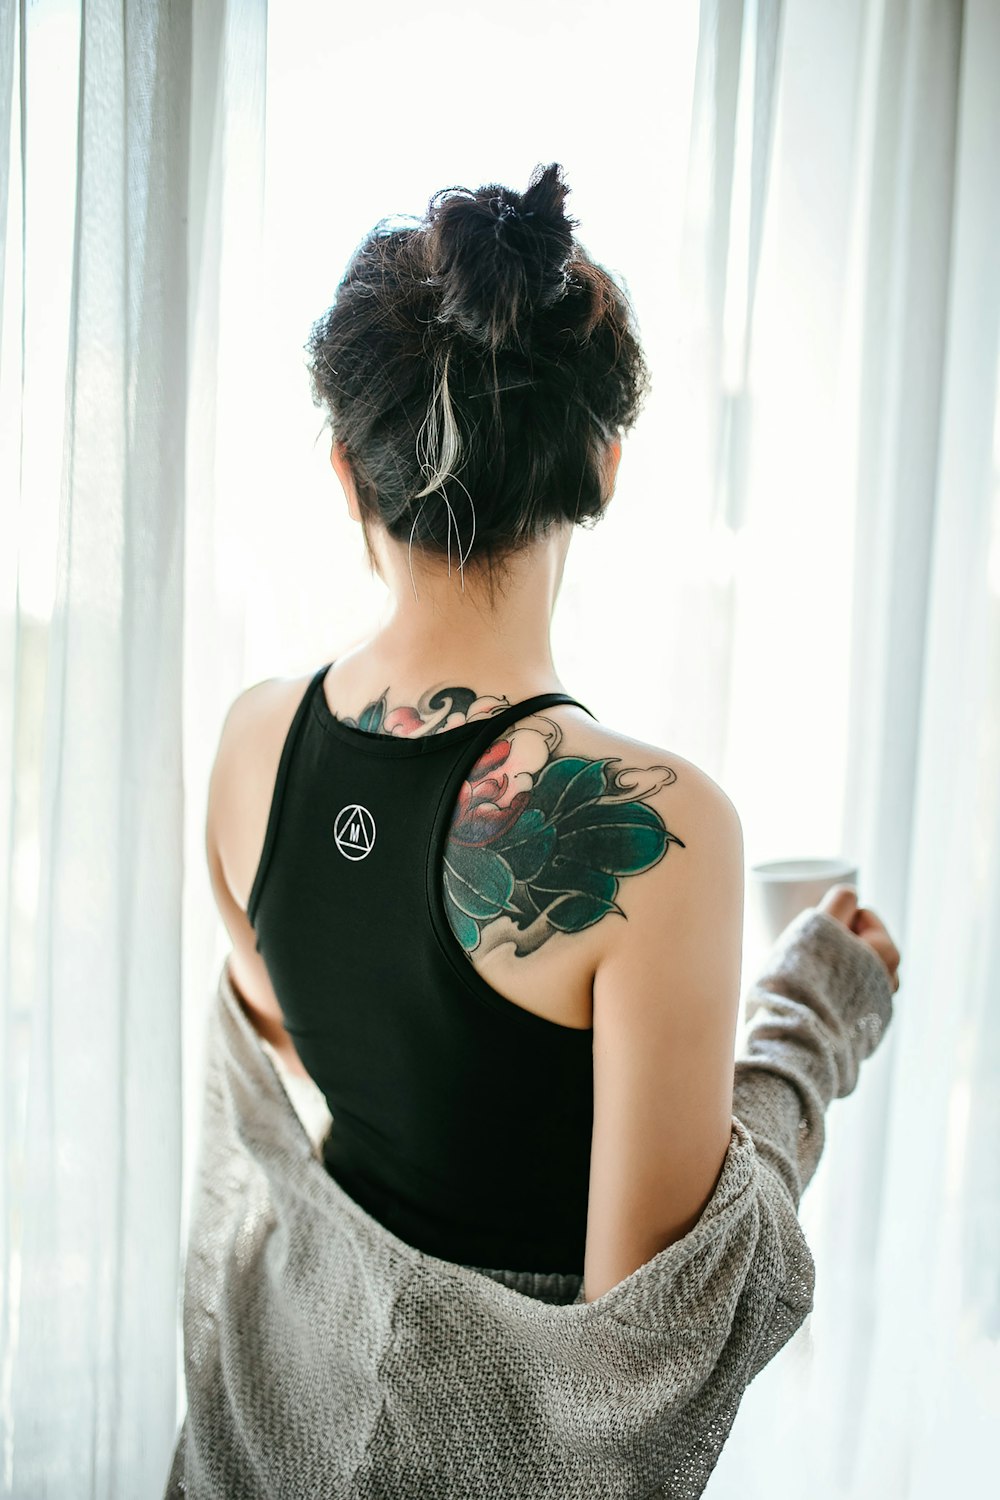 350+ Tattoo Girl Pictures | Download Free Images on Unsplash